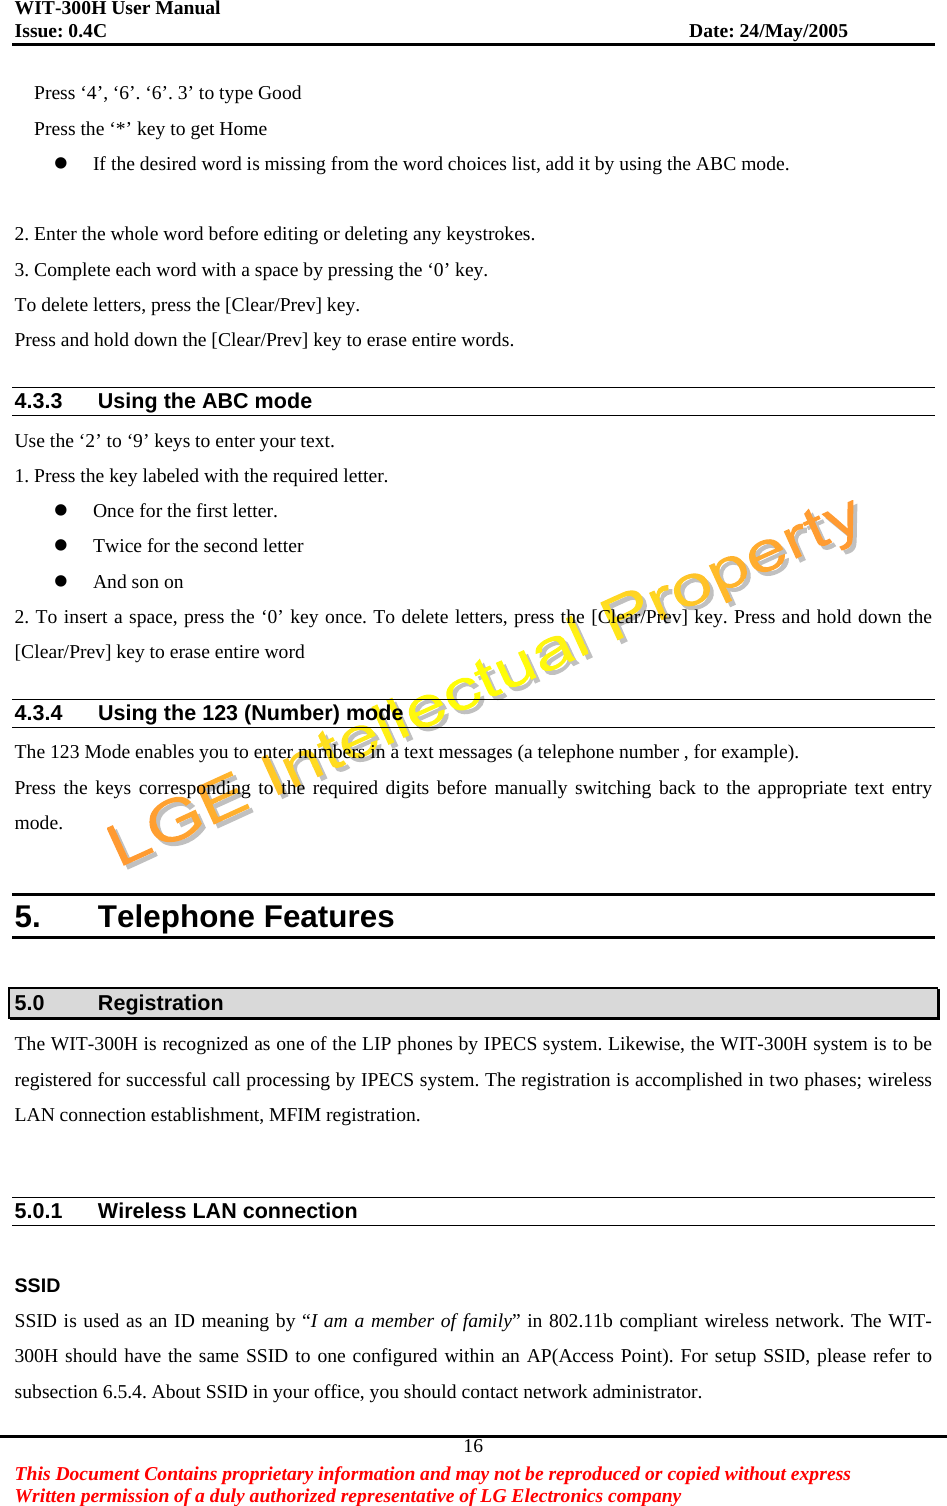 WIT-300H User Manual Issue: 0.4C                           Date: 24/May/2005   This Document Contains proprietary information and may not be reproduced or copied without express   Written permission of a duly authorized representative of LG Electronics company 16Press ‘4’, ‘6’. ‘6’. 3’ to type Good Press the ‘*’ key to get Home   If the desired word is missing from the word choices list, add it by using the ABC mode.  2. Enter the whole word before editing or deleting any keystrokes. 3. Complete each word with a space by pressing the ‘0’ key. To delete letters, press the [Clear/Prev] key. Press and hold down the [Clear/Prev] key to erase entire words.  4.3.3  Using the ABC mode Use the ‘2’ to ‘9’ keys to enter your text. 1. Press the key labeled with the required letter.   Once for the first letter.   Twice for the second letter   And son on 2. To insert a space, press the ‘0’ key once. To delete letters, press the [Clear/Prev] key. Press and hold down the [Clear/Prev] key to erase entire word  4.3.4  Using the 123 (Number) mode The 123 Mode enables you to enter numbers in a text messages (a telephone number , for example). Press the keys corresponding to the required digits before manually switching back to the appropriate text entry mode.  5. Telephone Features  5.0 Registration The WIT-300H is recognized as one of the LIP phones by IPECS system. Likewise, the WIT-300H system is to be registered for successful call processing by IPECS system. The registration is accomplished in two phases; wireless LAN connection establishment, MFIM registration.     5.0.1  Wireless LAN connection  SSID  SSID is used as an ID meaning by “I am a member of family” in 802.11b compliant wireless network. The WIT-300H should have the same SSID to one configured within an AP(Access Point). For setup SSID, please refer to subsection 6.5.4. About SSID in your office, you should contact network administrator.   